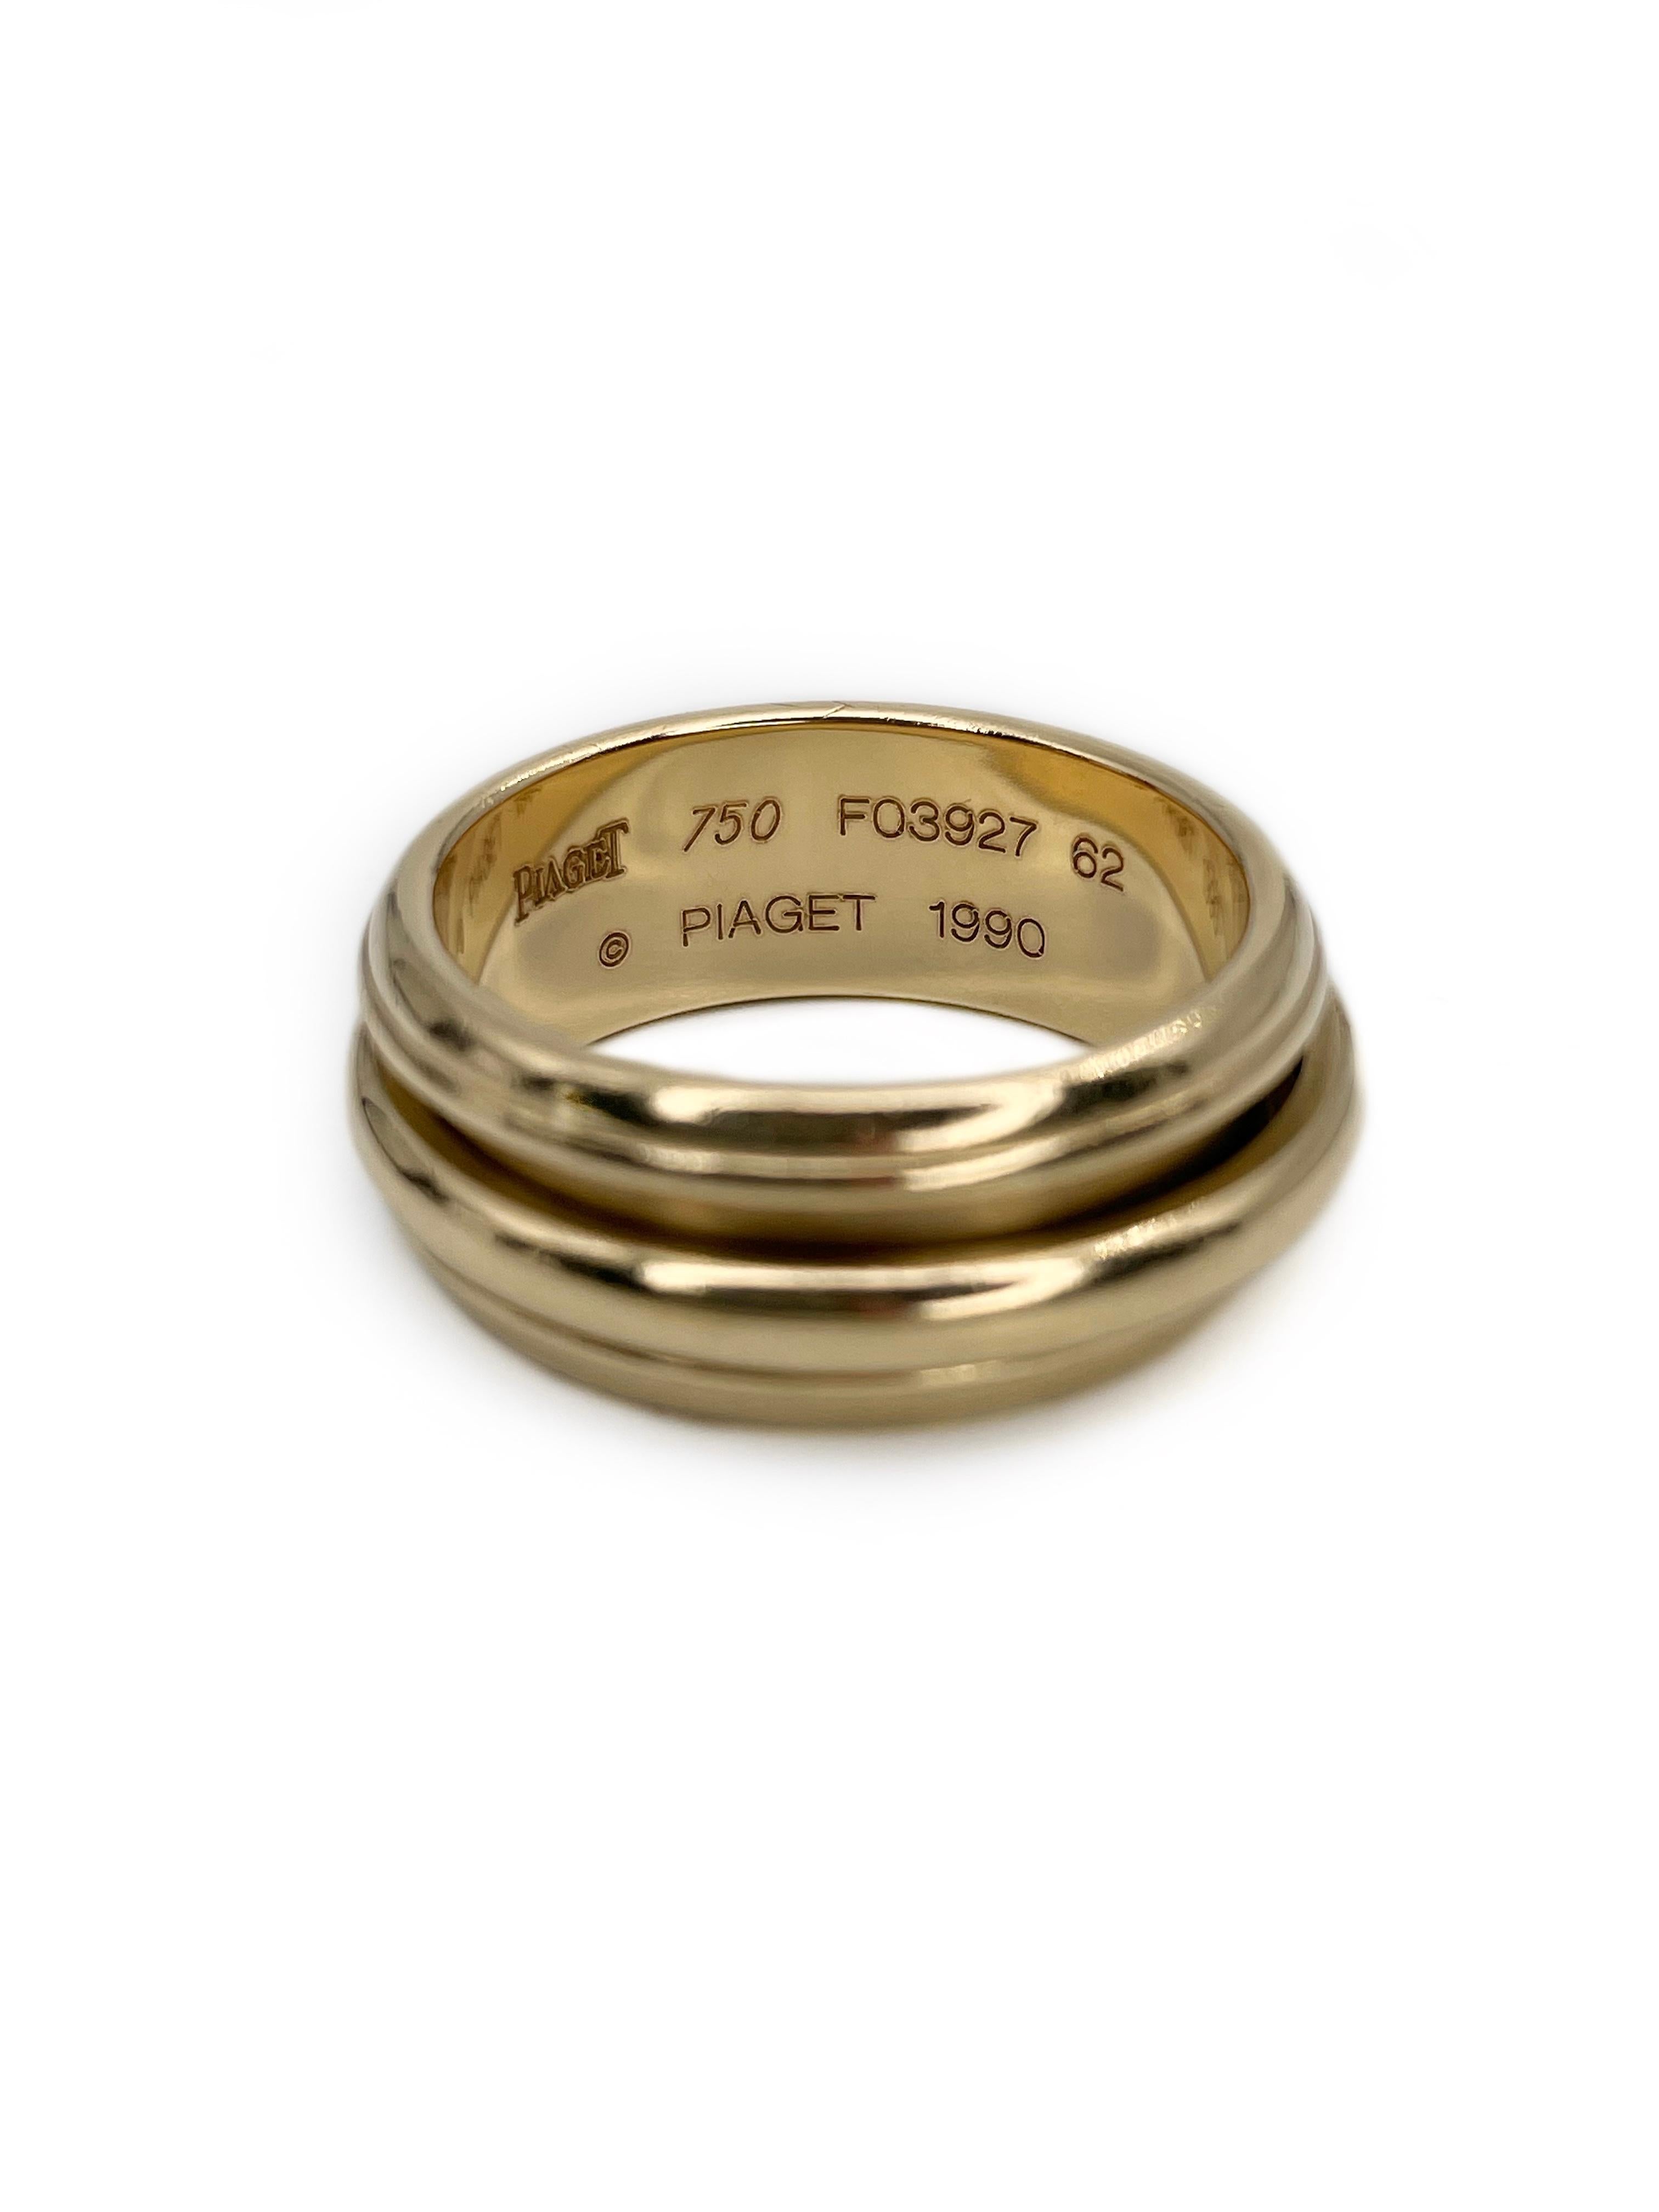 This is a Piaget “Possession” ring crafted in 18K yellow gold. It is set with a spinning gold band in the centre. Signed: “Piaget 750 FO3927 62 © PIAGET 1990”

Weight: 14.68g
Size: 20 (US10.25)